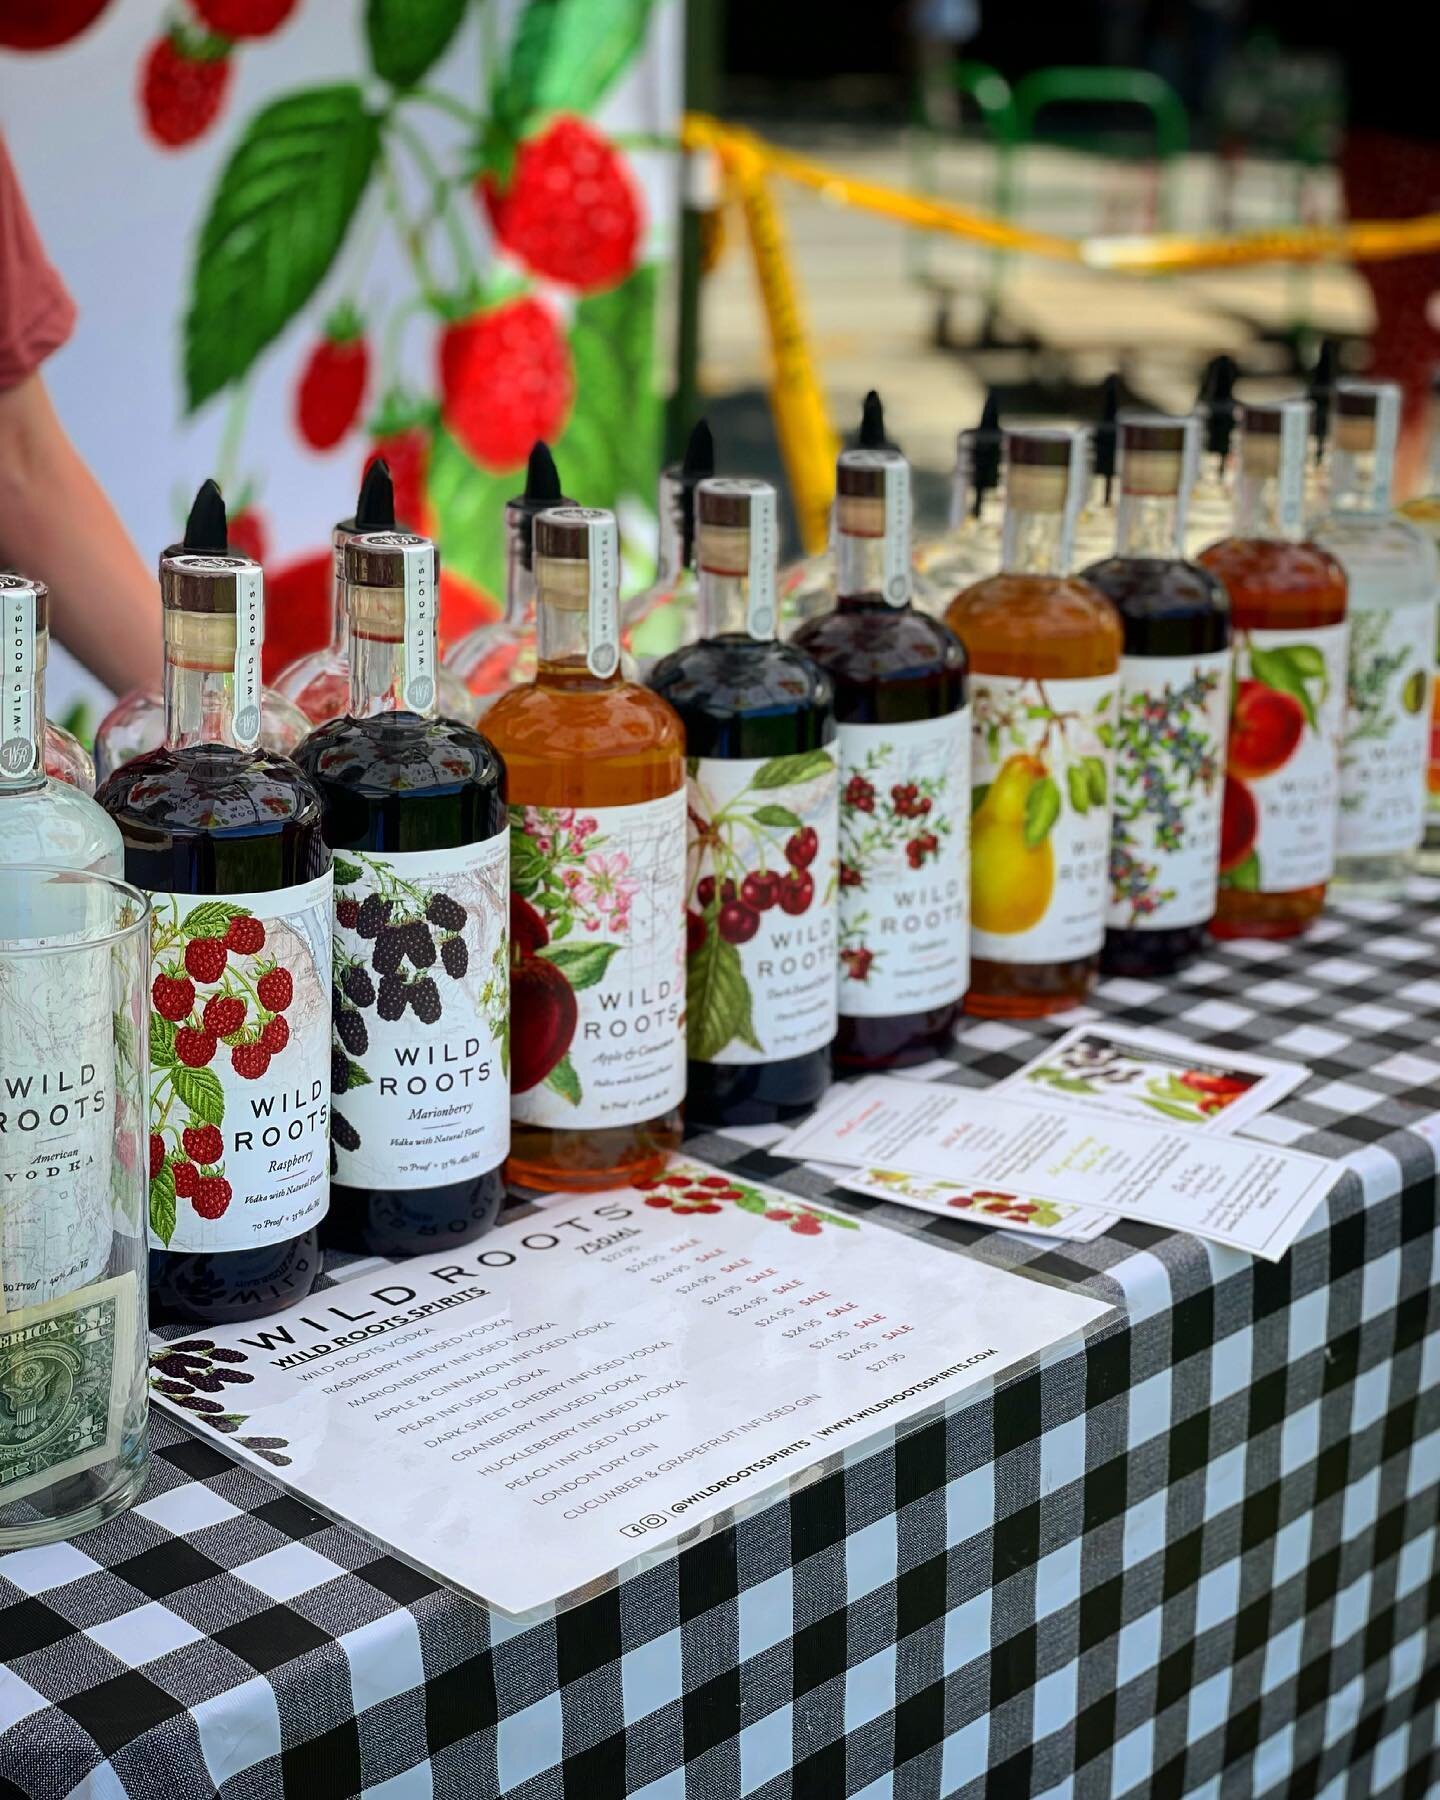 Just a few of the many summer splendors you&rsquo;ll be able to savor if you stop by the South Waterfront Farmers Market today from 2:00 pm &ndash; 7:00 pm&hellip;
&nbsp;

Infused Vodka from @wildrootsspirits

Macrons from @butterbeanhomegoods

Wild 